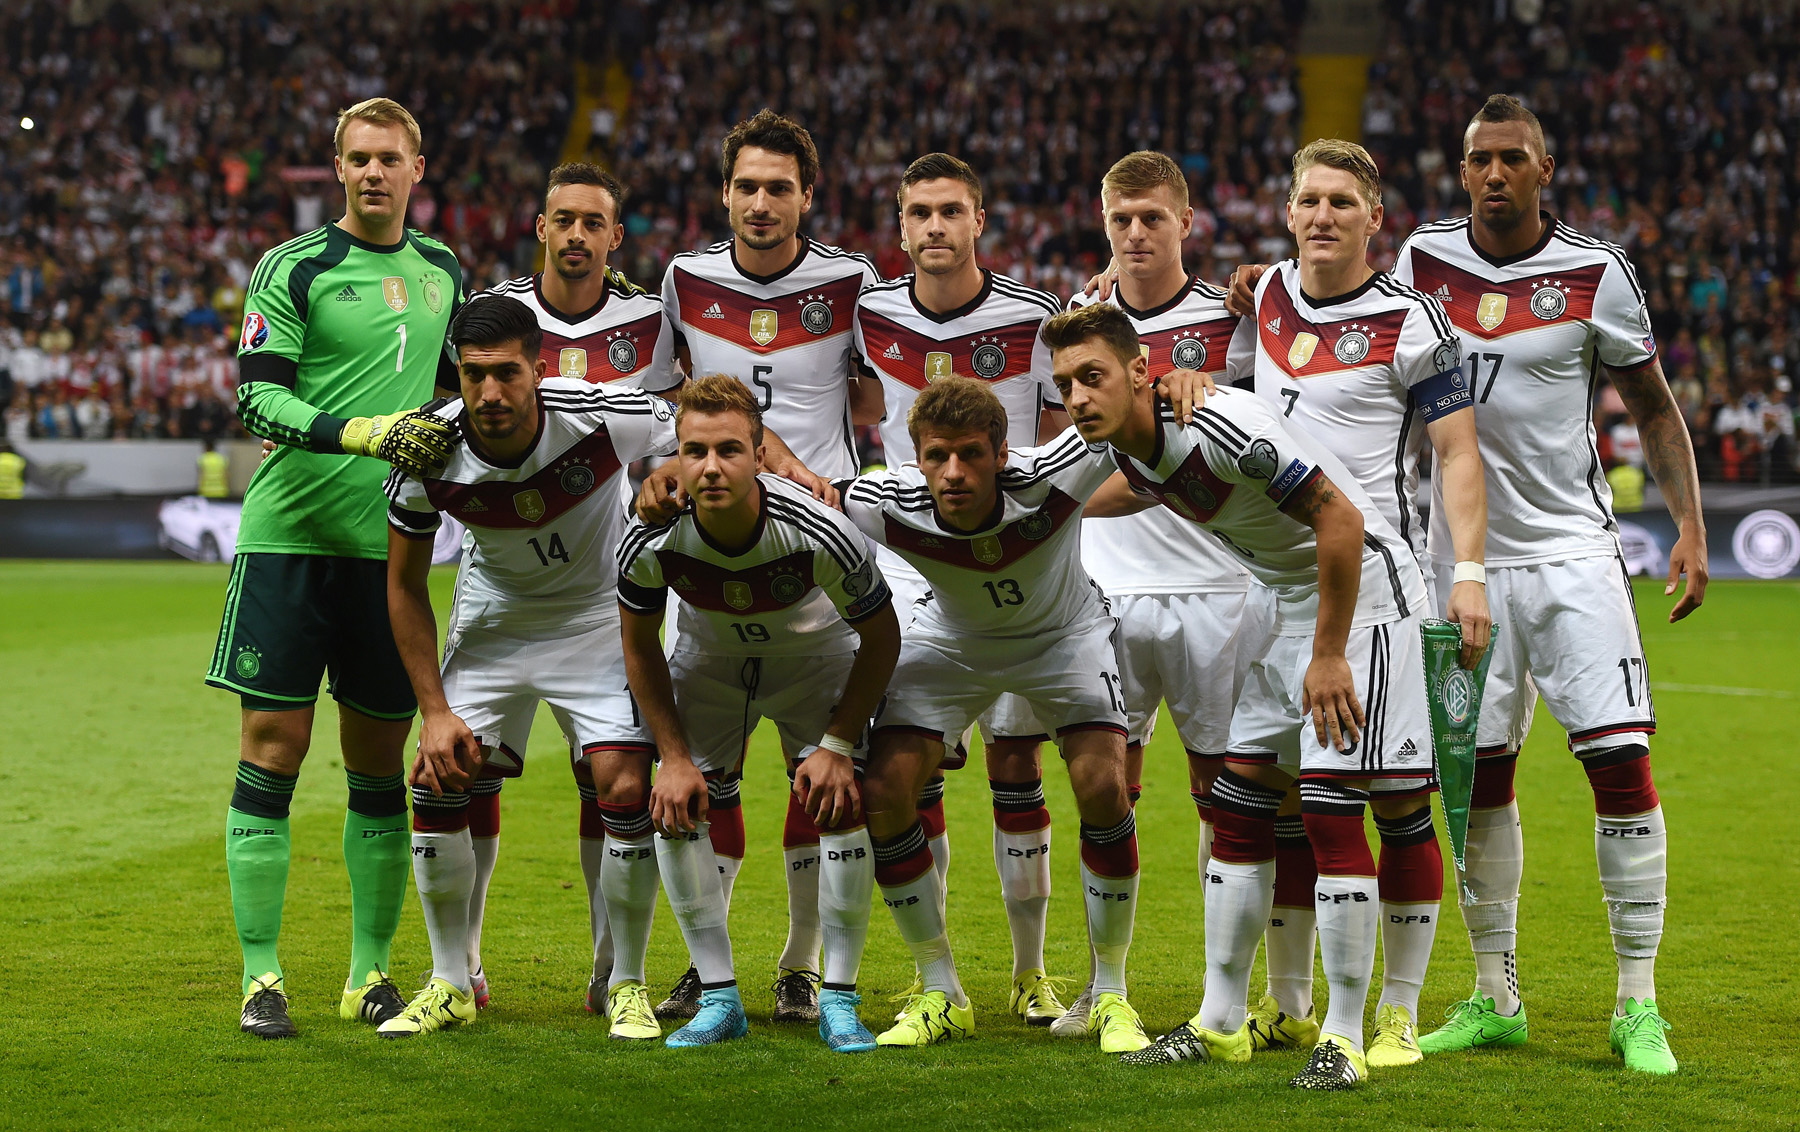 Germany's players ( Back row L to R) Germany's goalkeeper Manuel Neuer, Germany's forward Karim Bellarabi, Germany's defender Mats Hummels, Germany's defender Jonas Hector, Germany's midfielder Toni Kroos, Germany's midfielder Bastian Schweinsteiger and Germany's defender Jerome Boateng, (front row L to R) Germany's midfielder Emre Can, Germany's forward Mario Goetze, Germany's midfielder Thomas Mueller and Germany's forward Mesut Ozil pose for a picture ahead of the Euro 2016 qualifying football match between Germany and Poland in Frankfurt am Main, central Germany, on September 4, 2015. AFP PHOTO / PATRIK STOLLARZ (Photo credit should read PATRIK STOLLARZ/AFP/Getty Images)